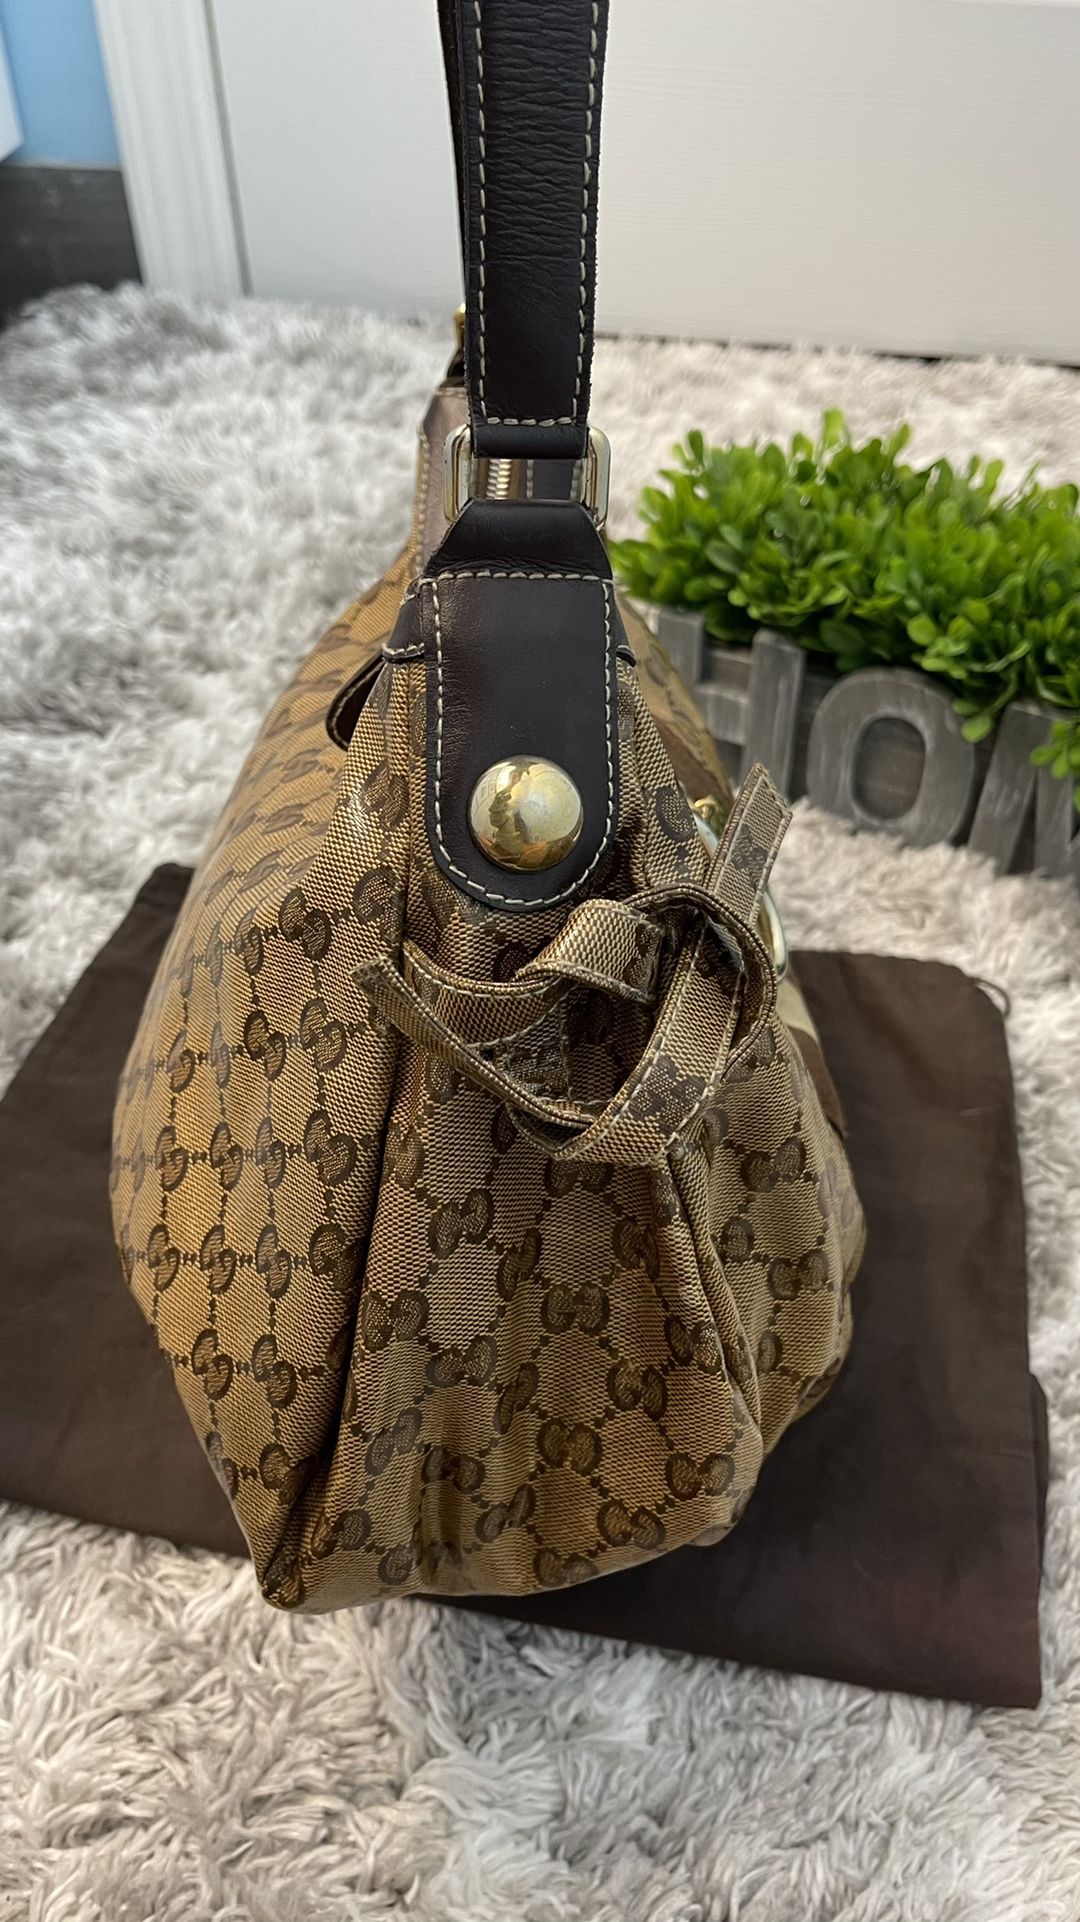 Gucci Bag Authentic for Sale in Oklahoma City, OK - OfferUp